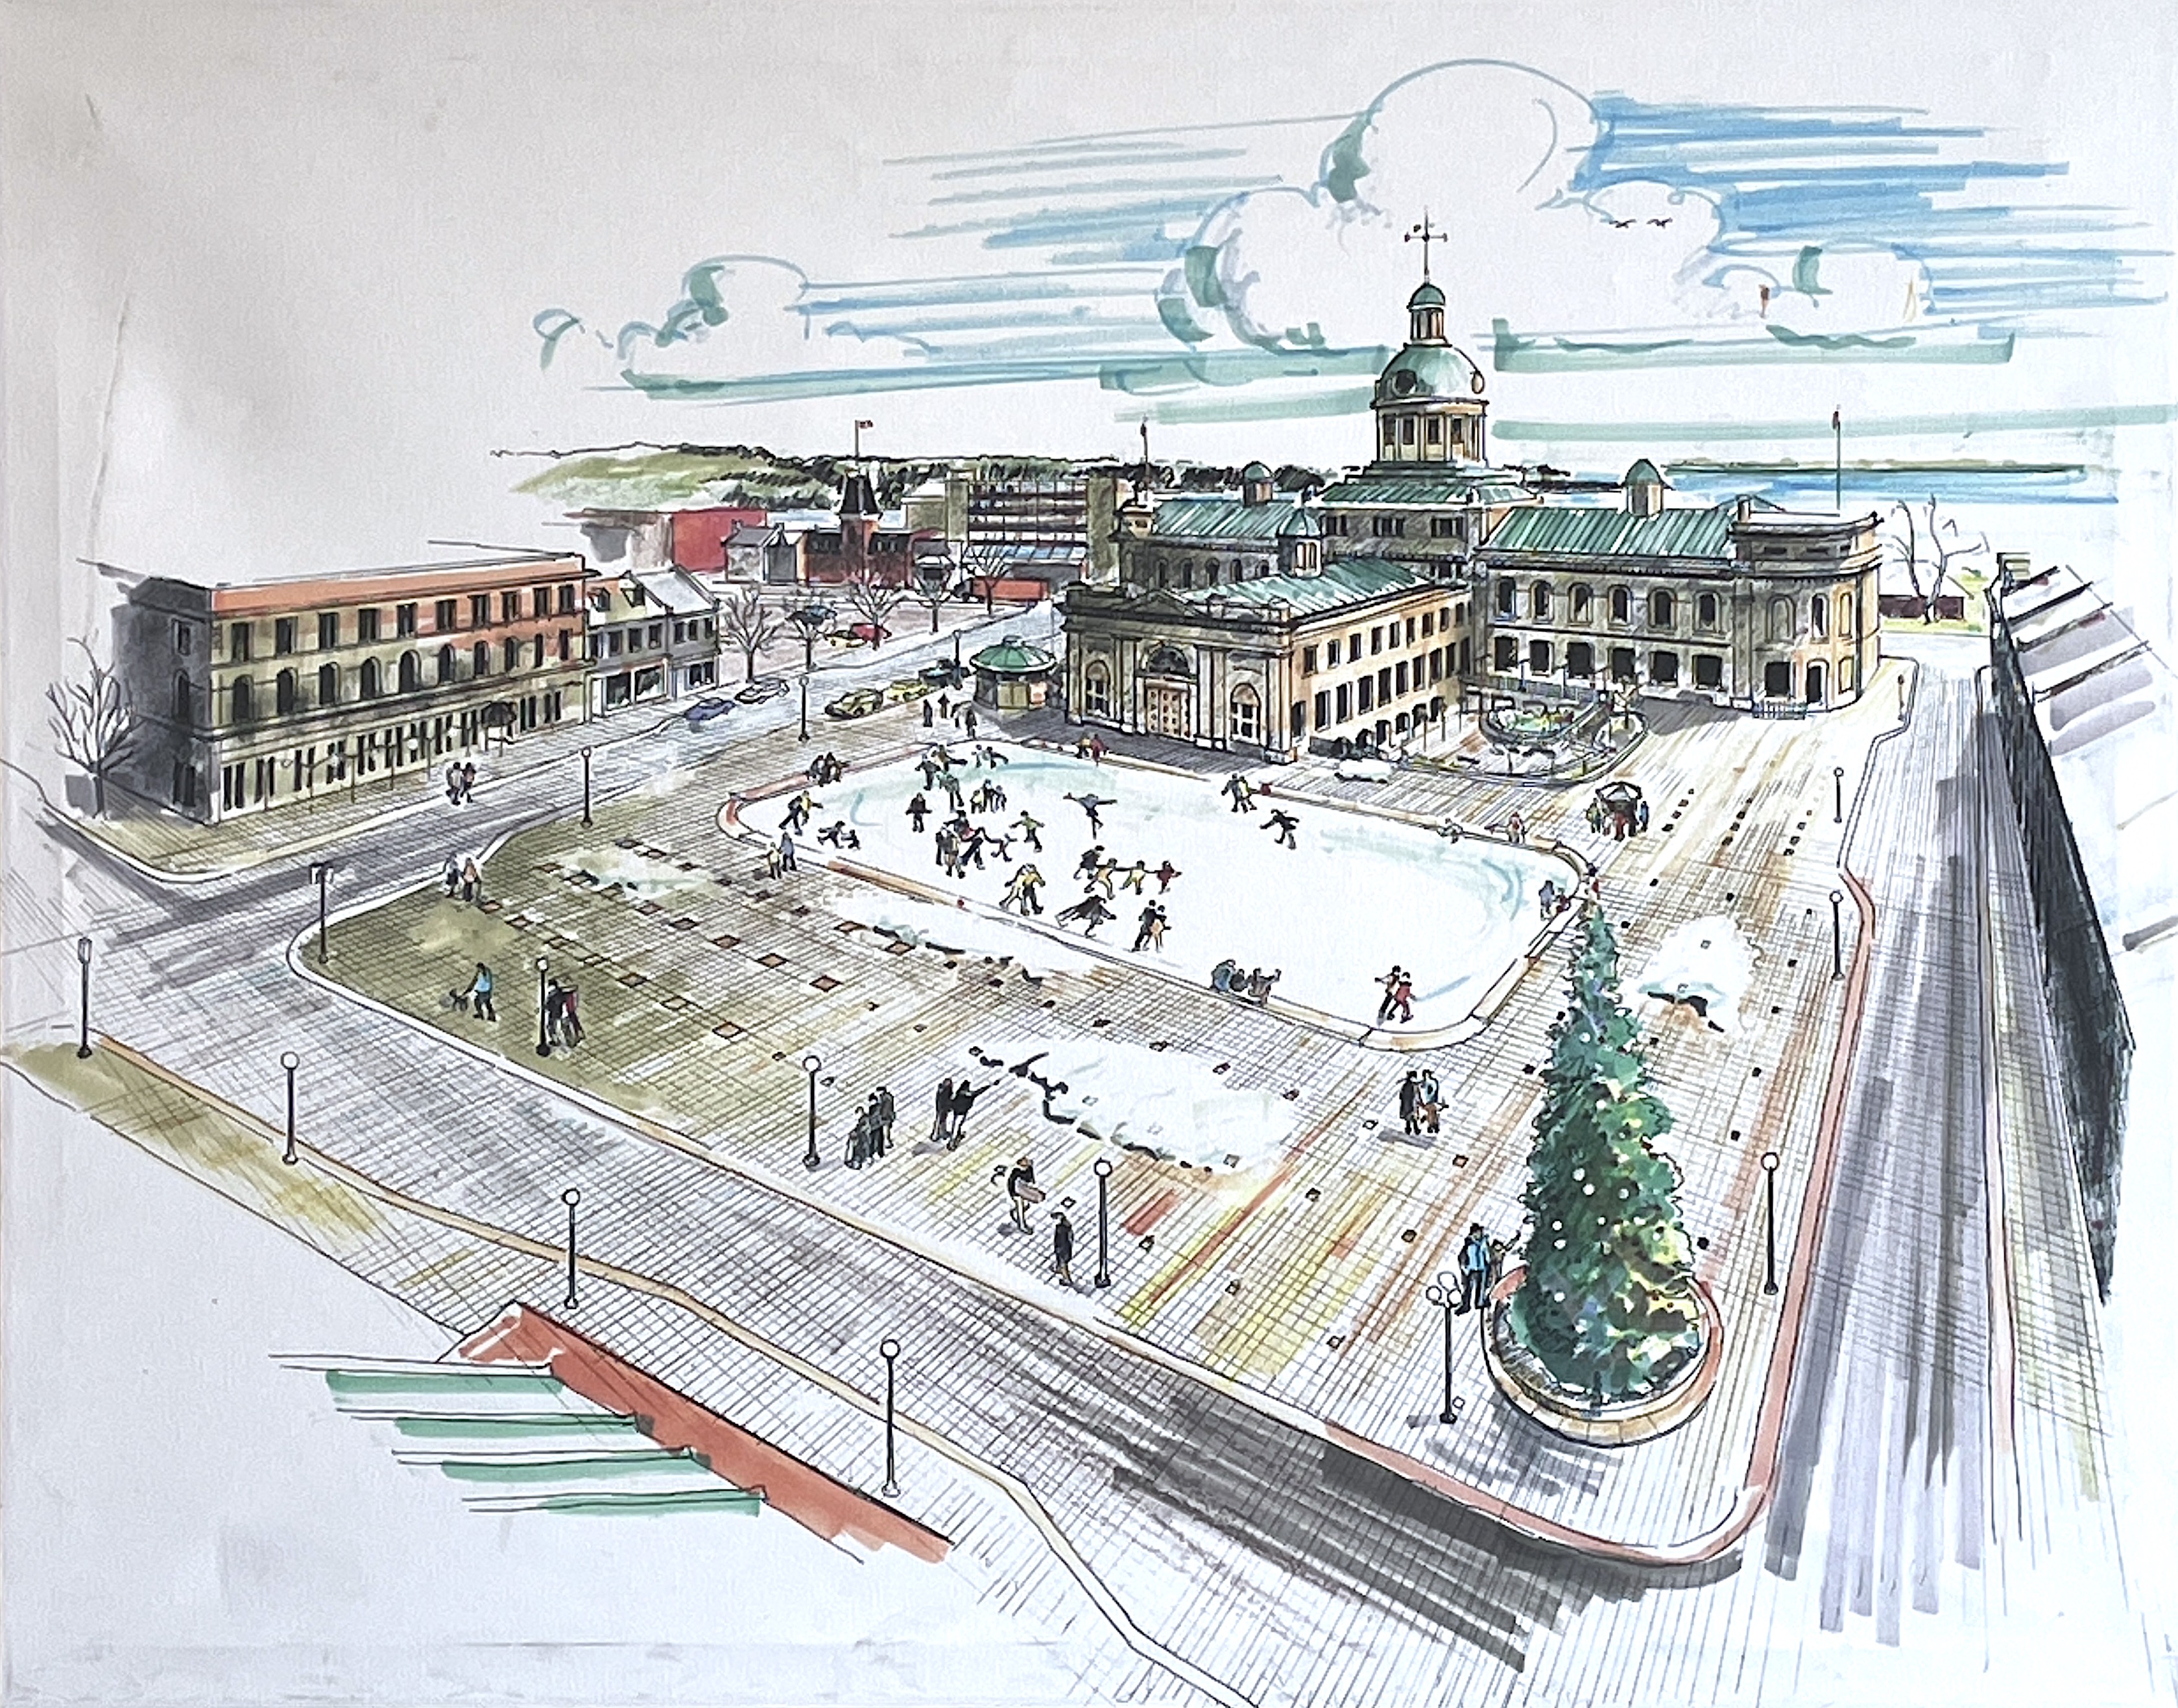 Envisioning Public Space in downtown Kingston